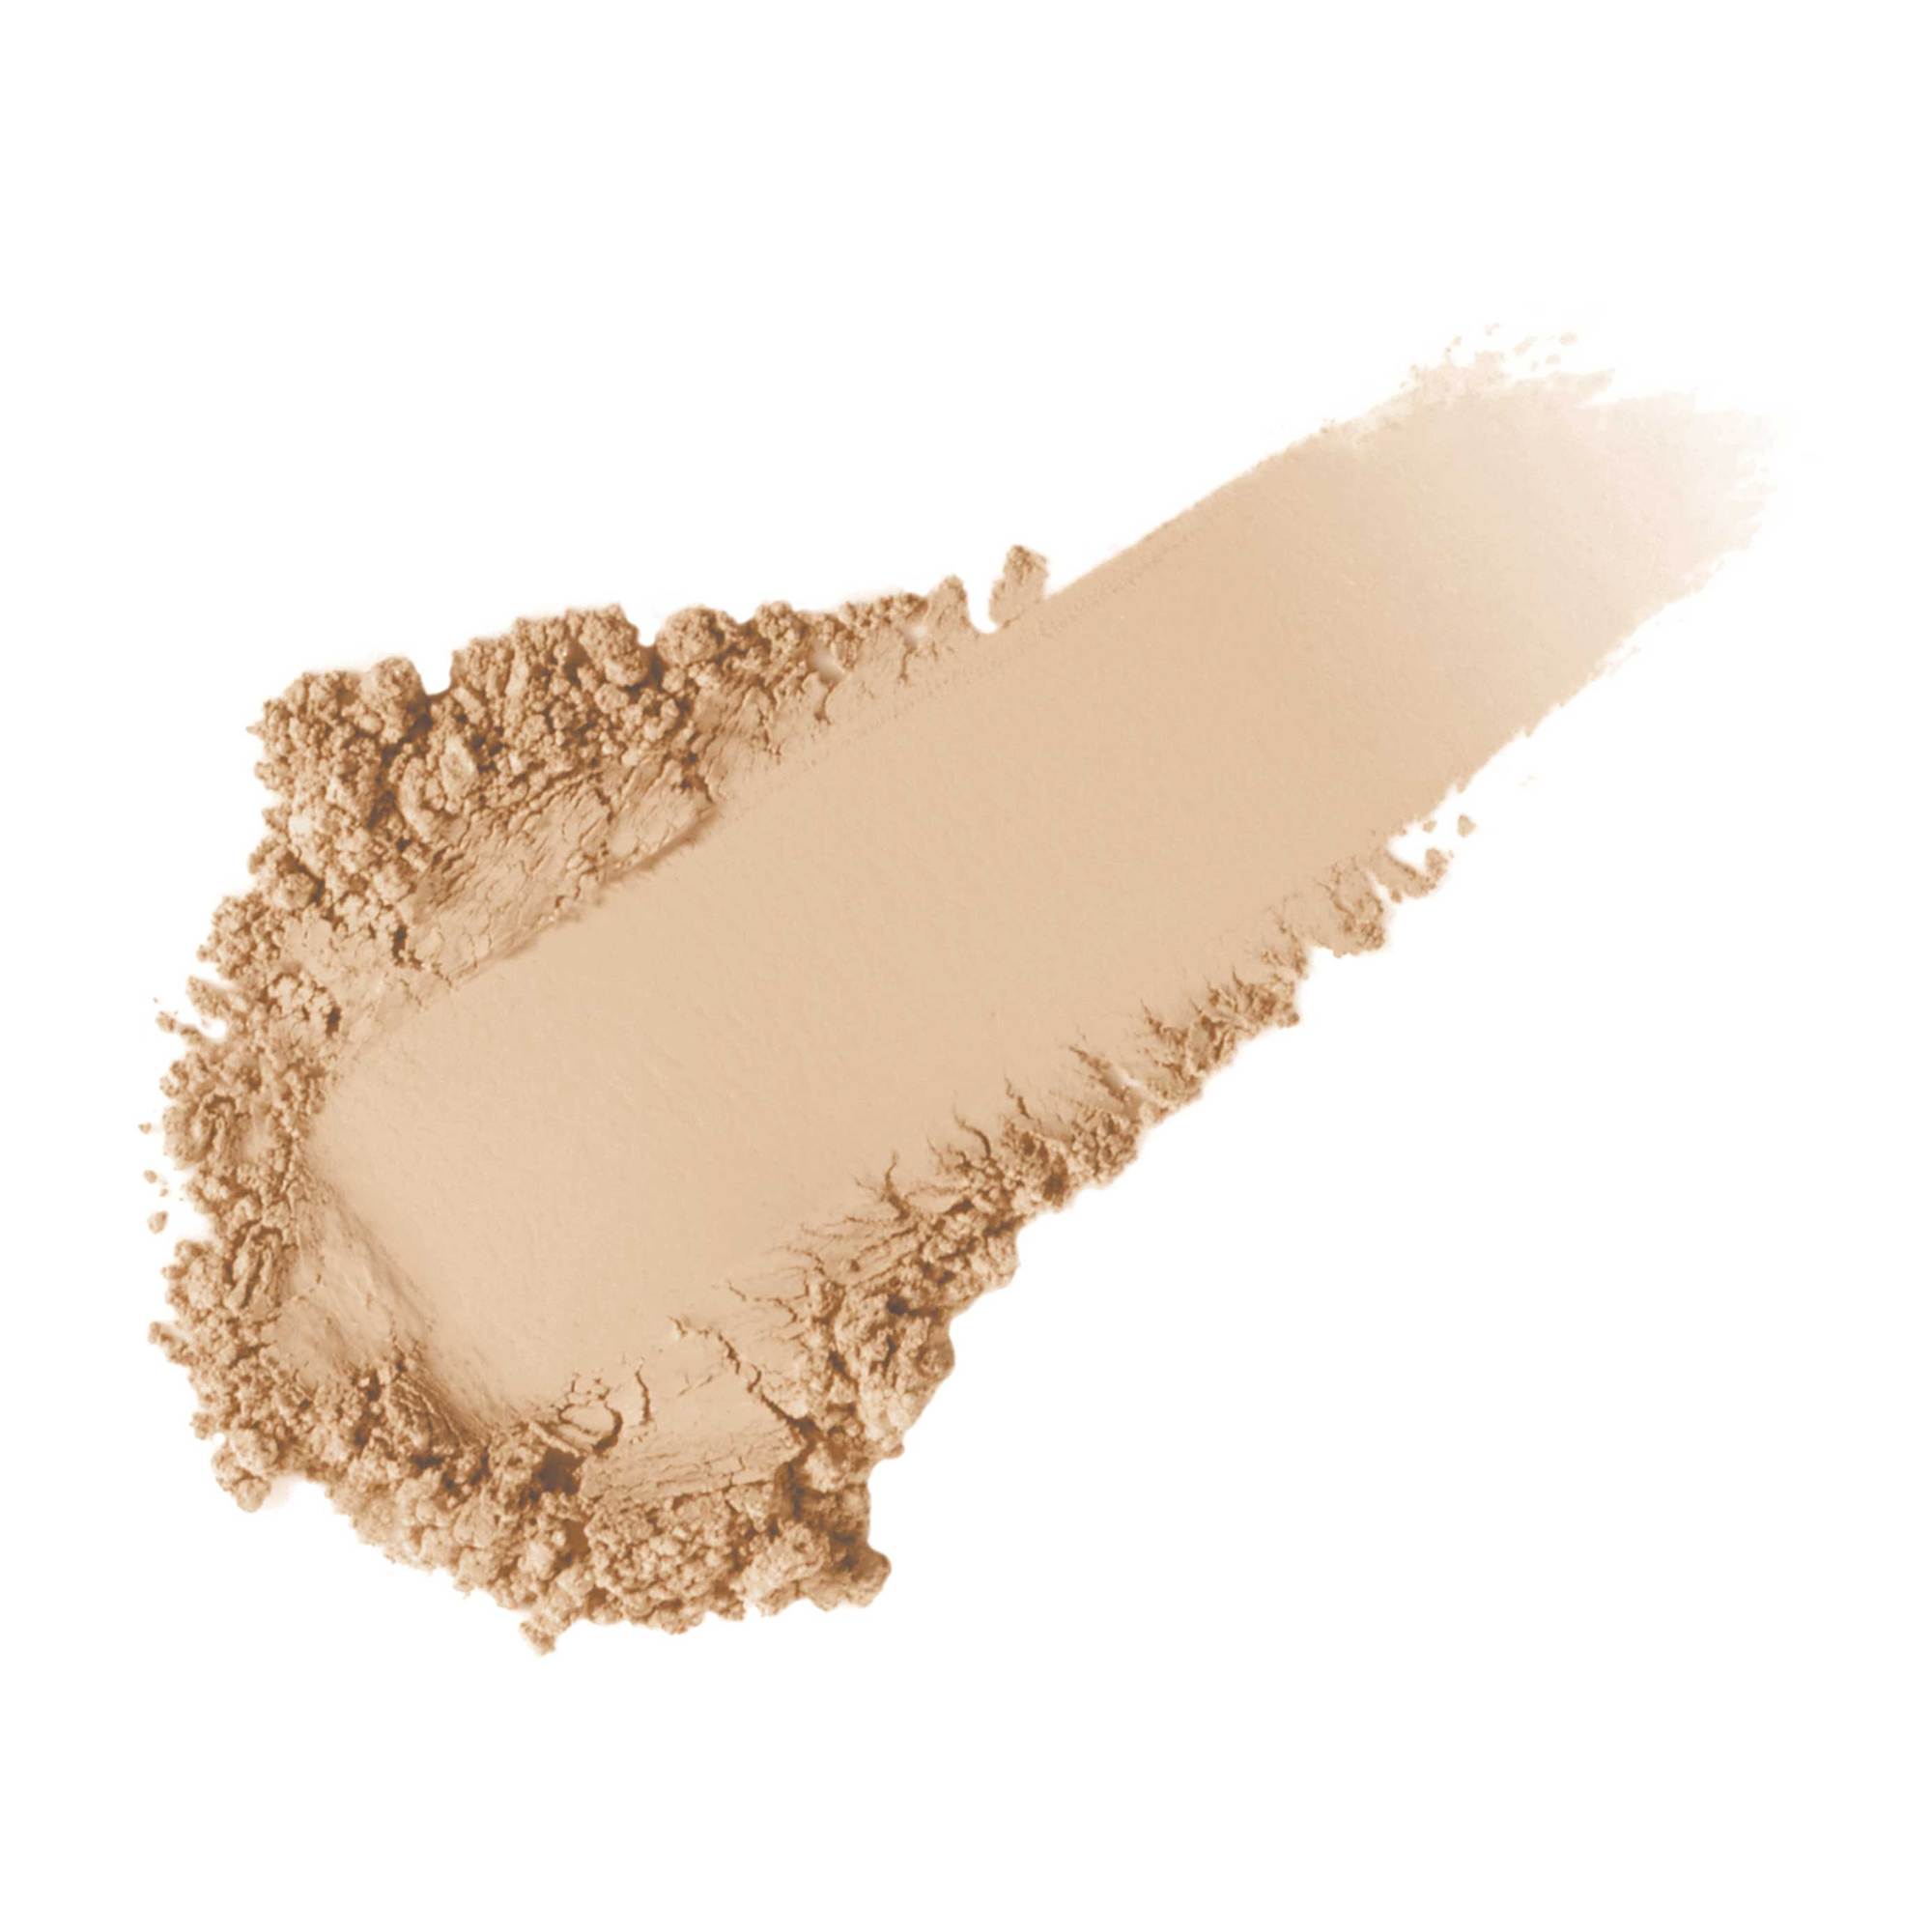 Jane Iredale Powder-Me SPF 30 Dry Sunscreen + 2 Refill Canisters